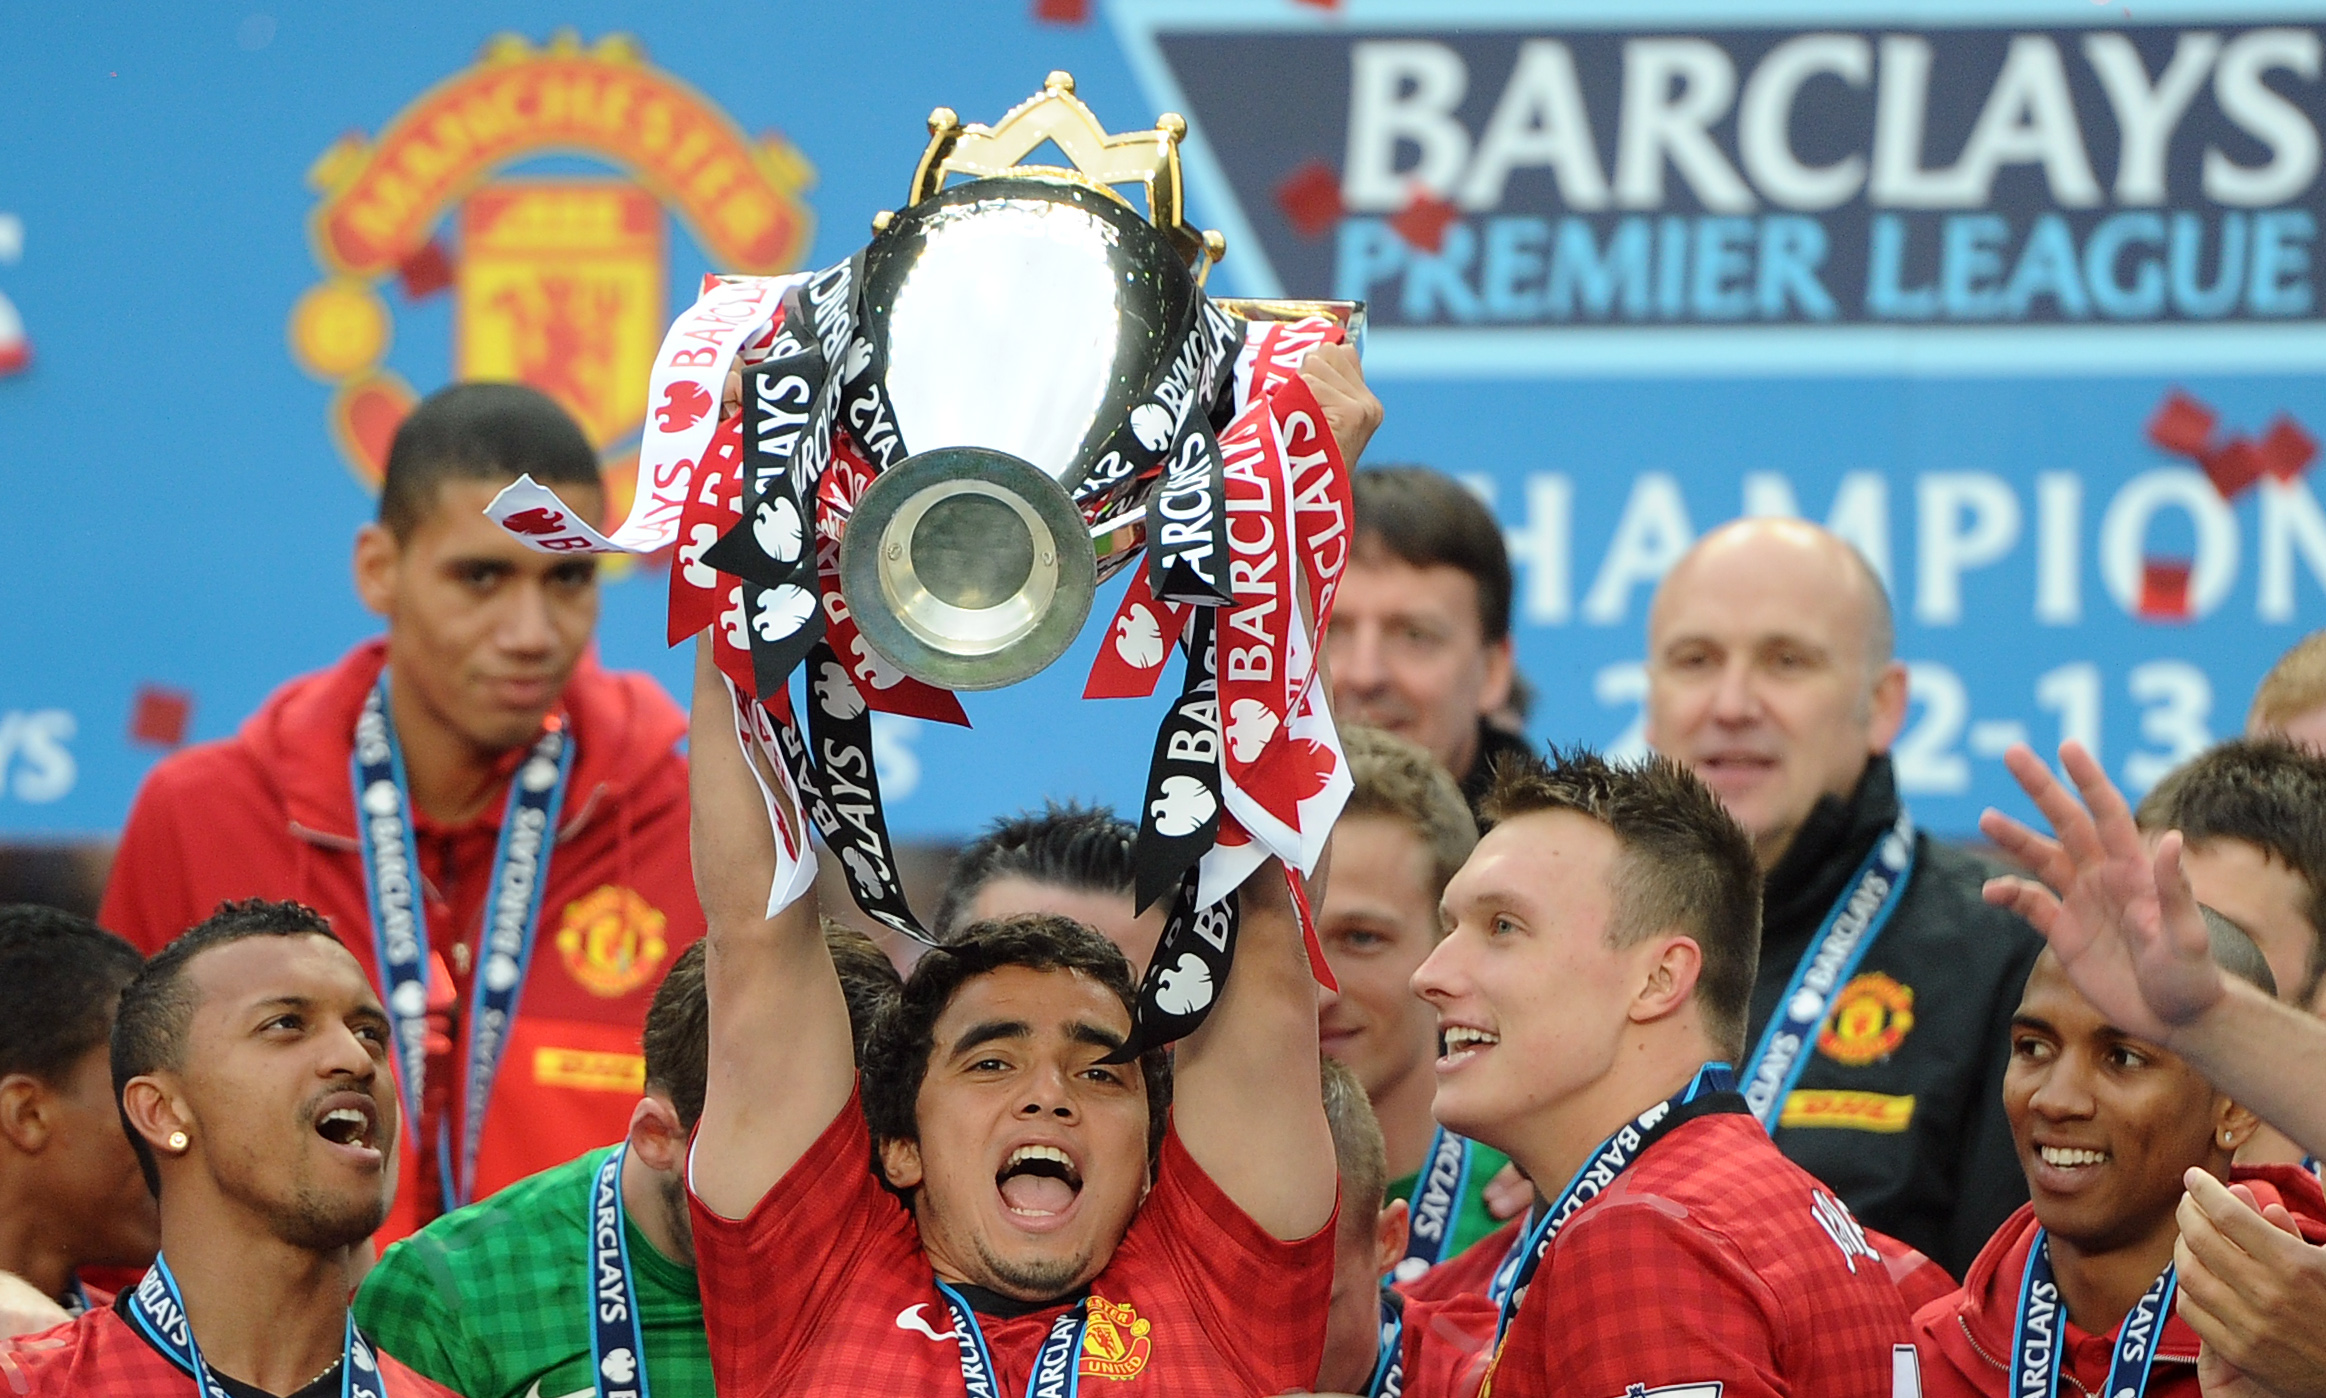 Rafael criticises Glazers’ failure to communicate with United fans